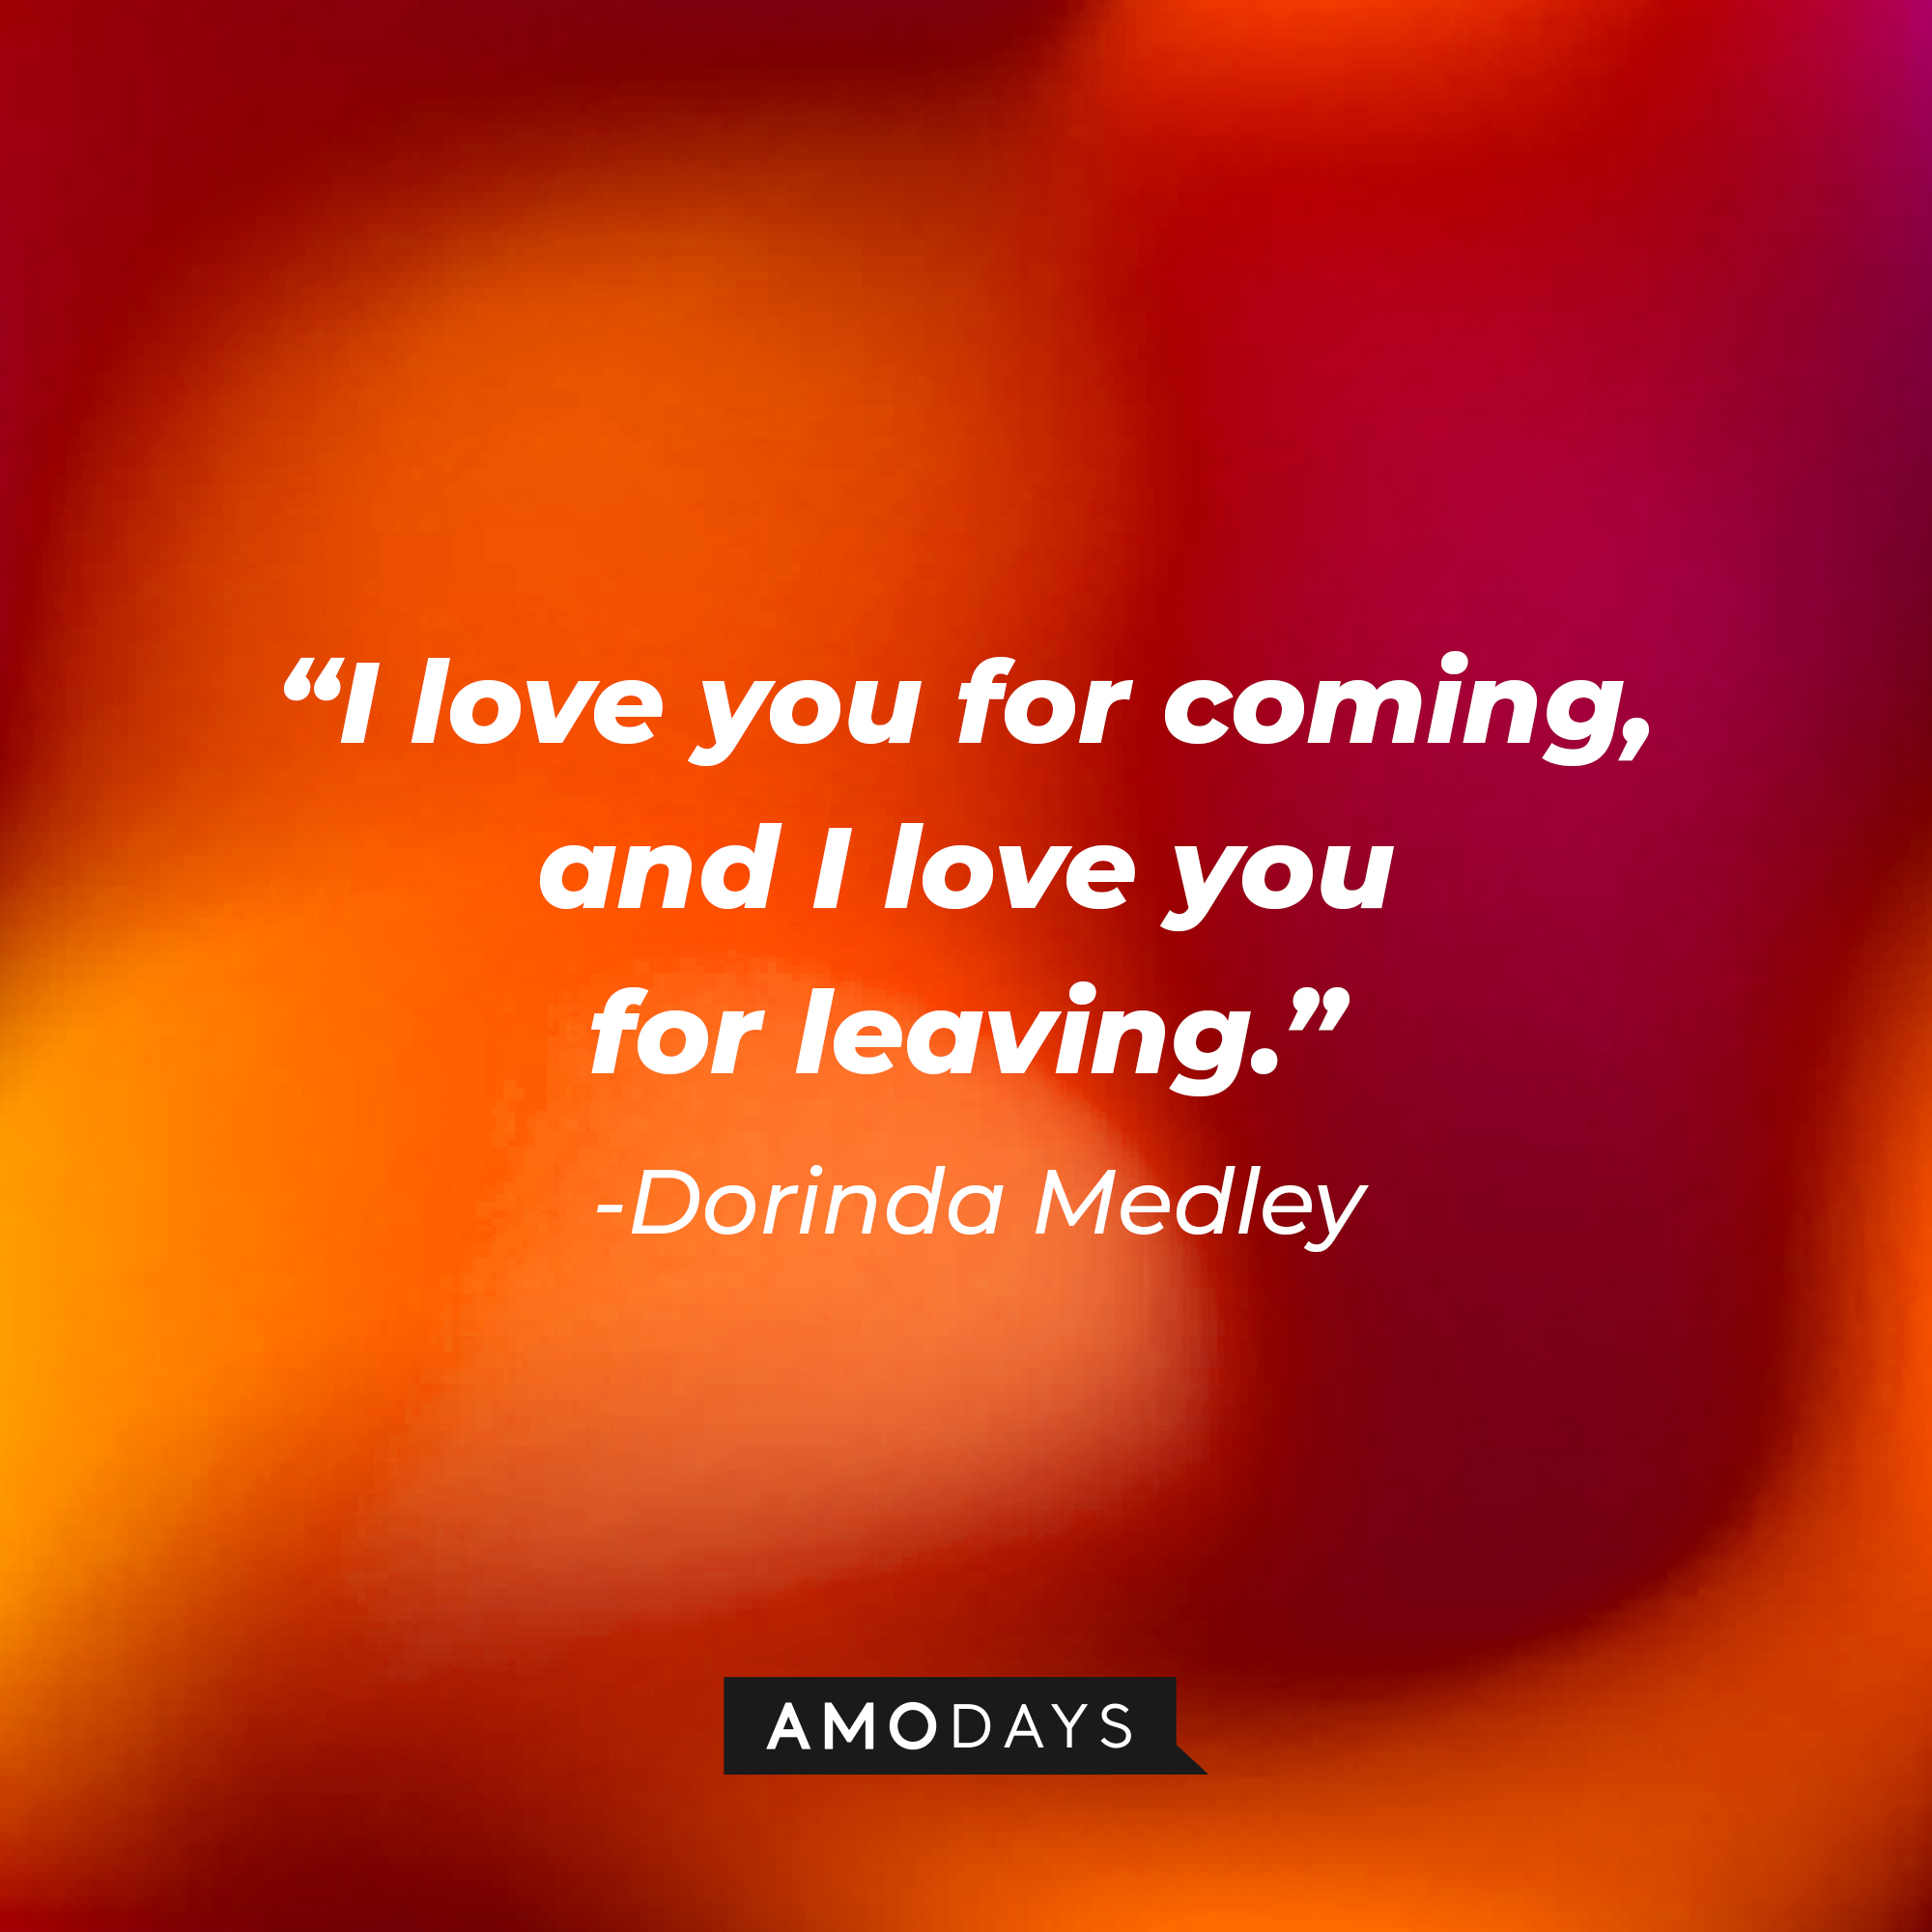 Dorinda Medley’s quote: "I love you for coming and I love you for leaving." | Source: AmoDays